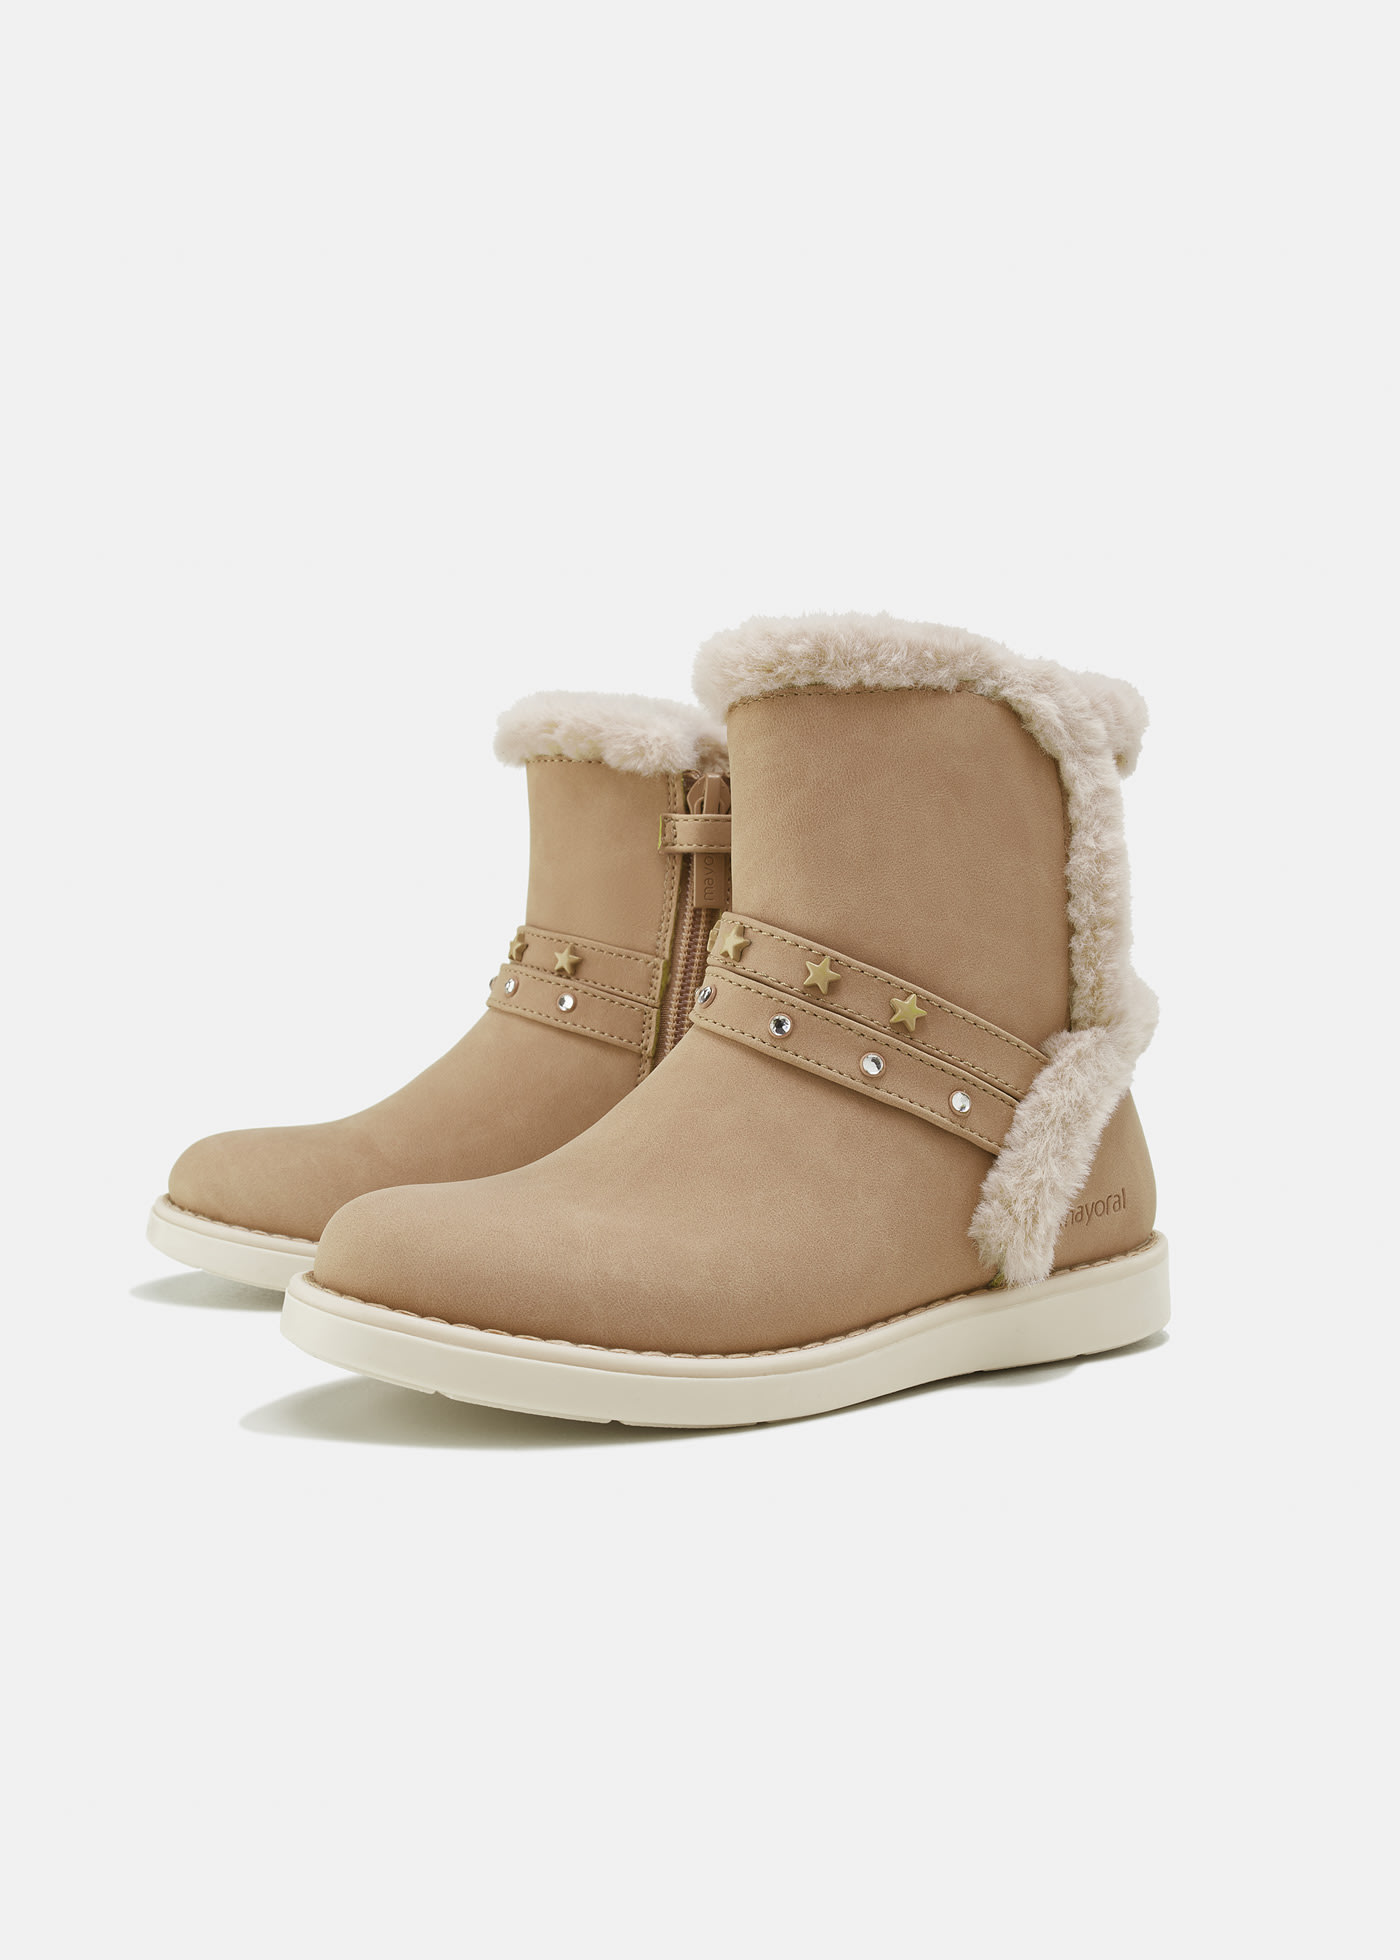 Faux fur lined boots girl